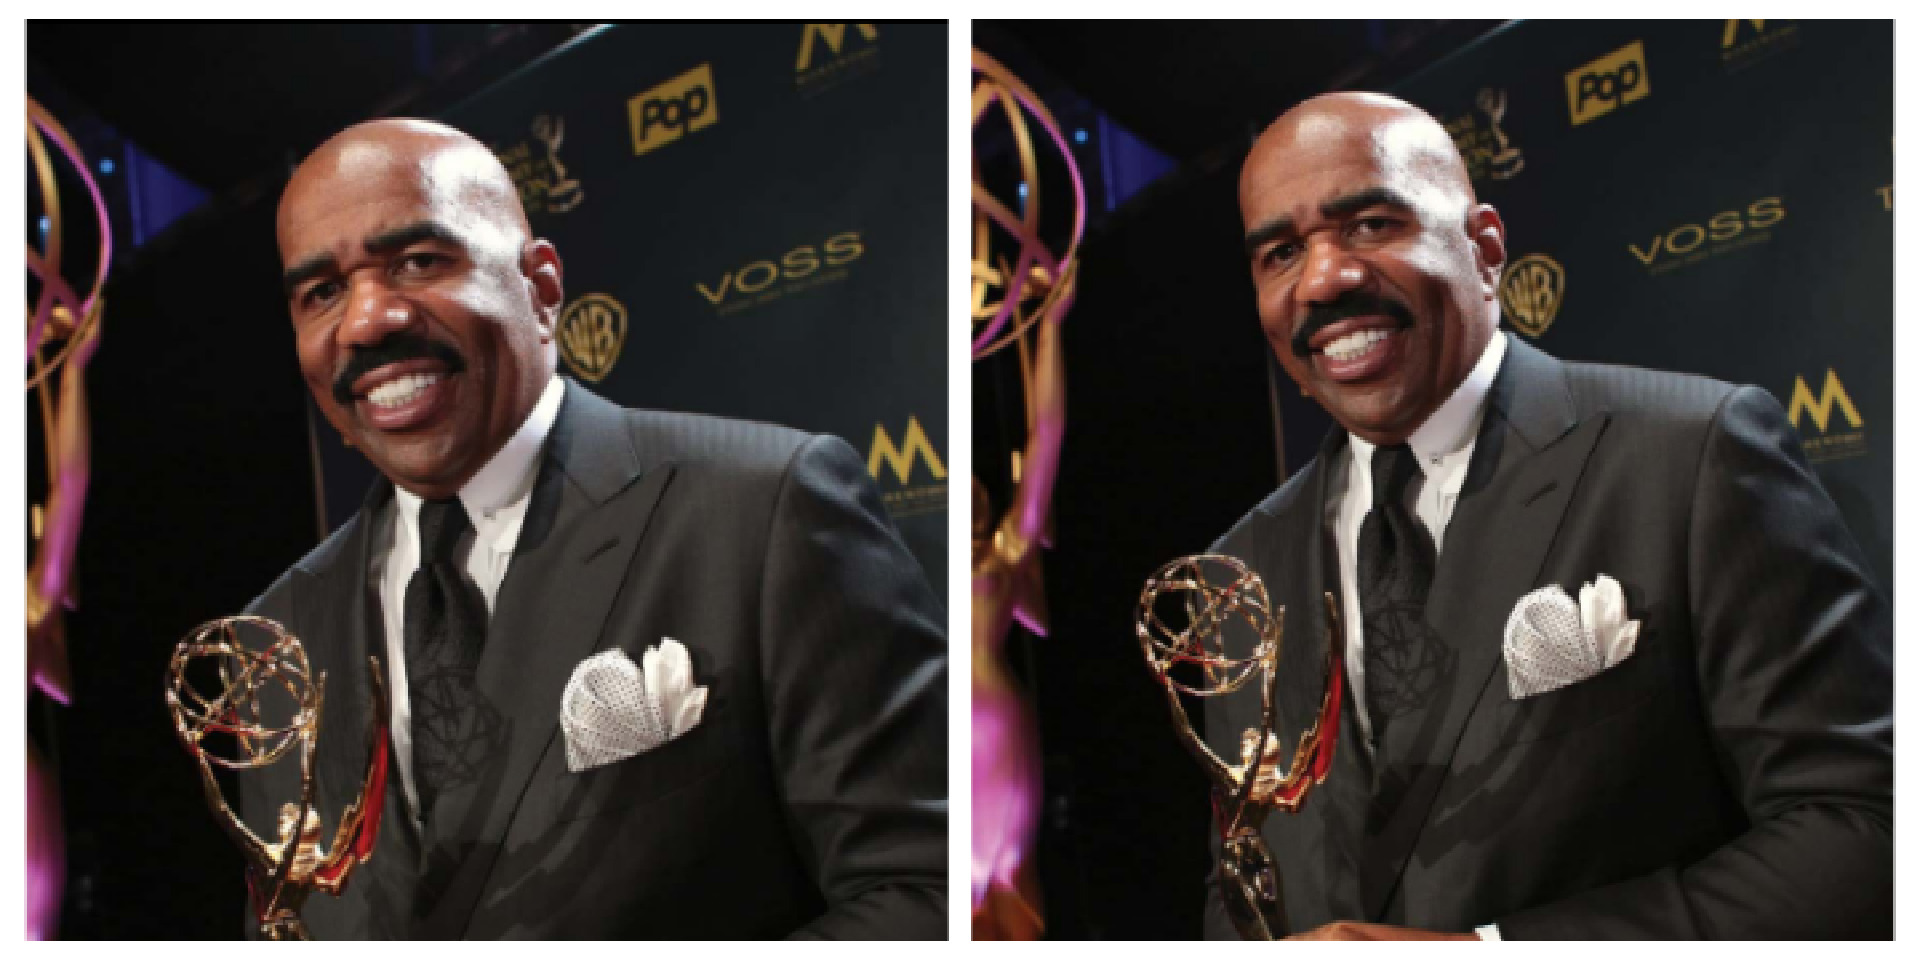 Fun Facts About American Comedian Steve Harvey